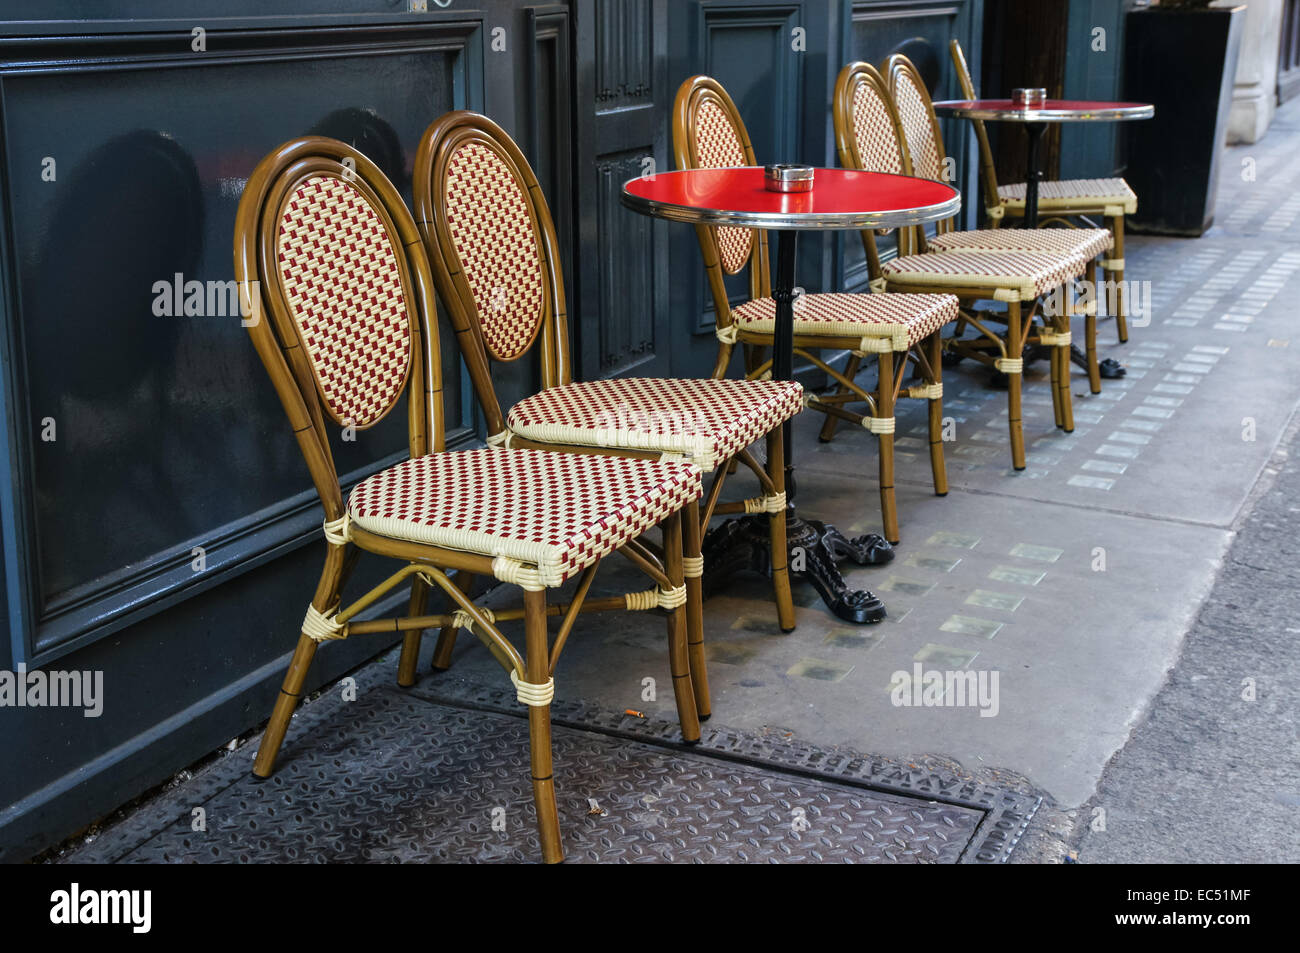 Tables and chairs outside restaurant in Fitzrovia, London England United Kingdom UK Stock Photo